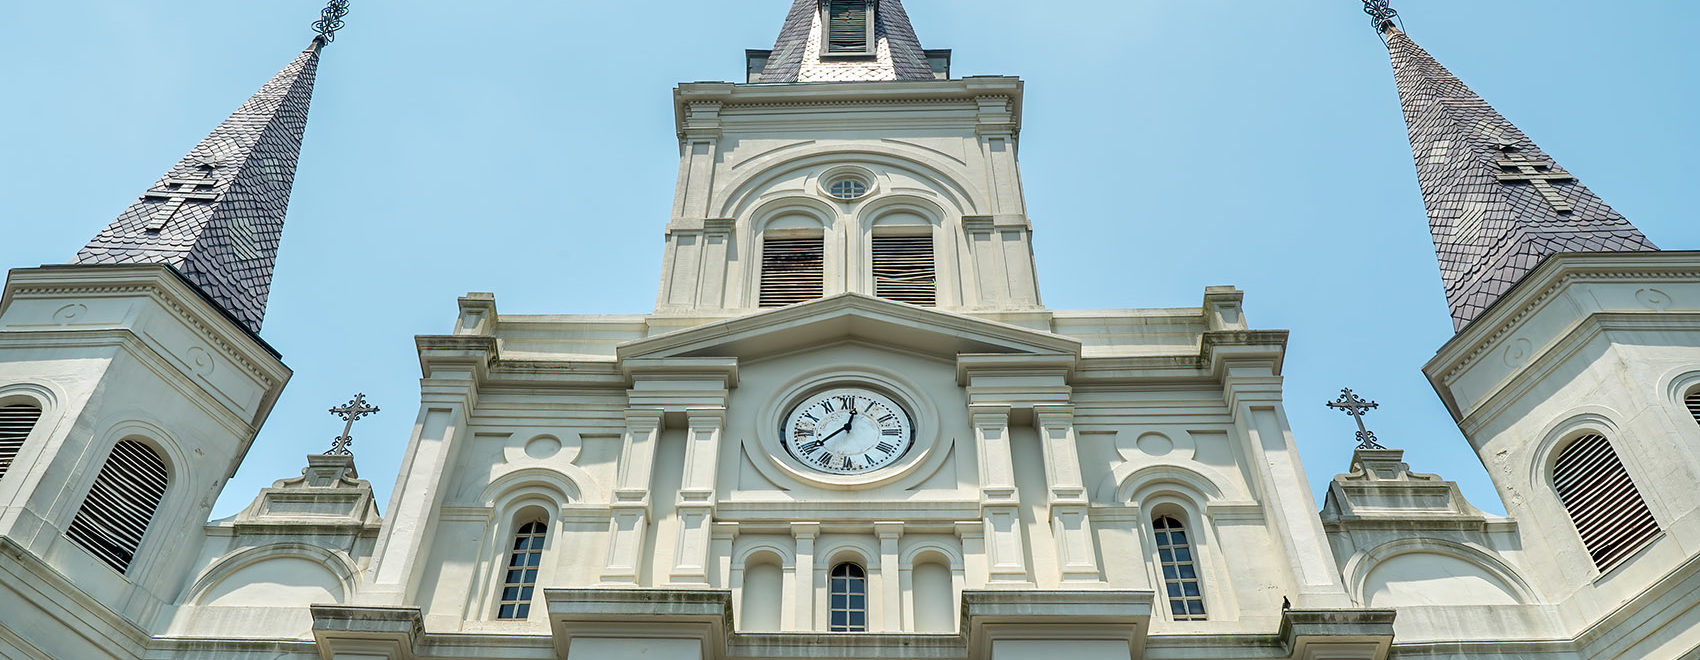 front of large church steeple clock light gray color saint louis cathedral new orleans